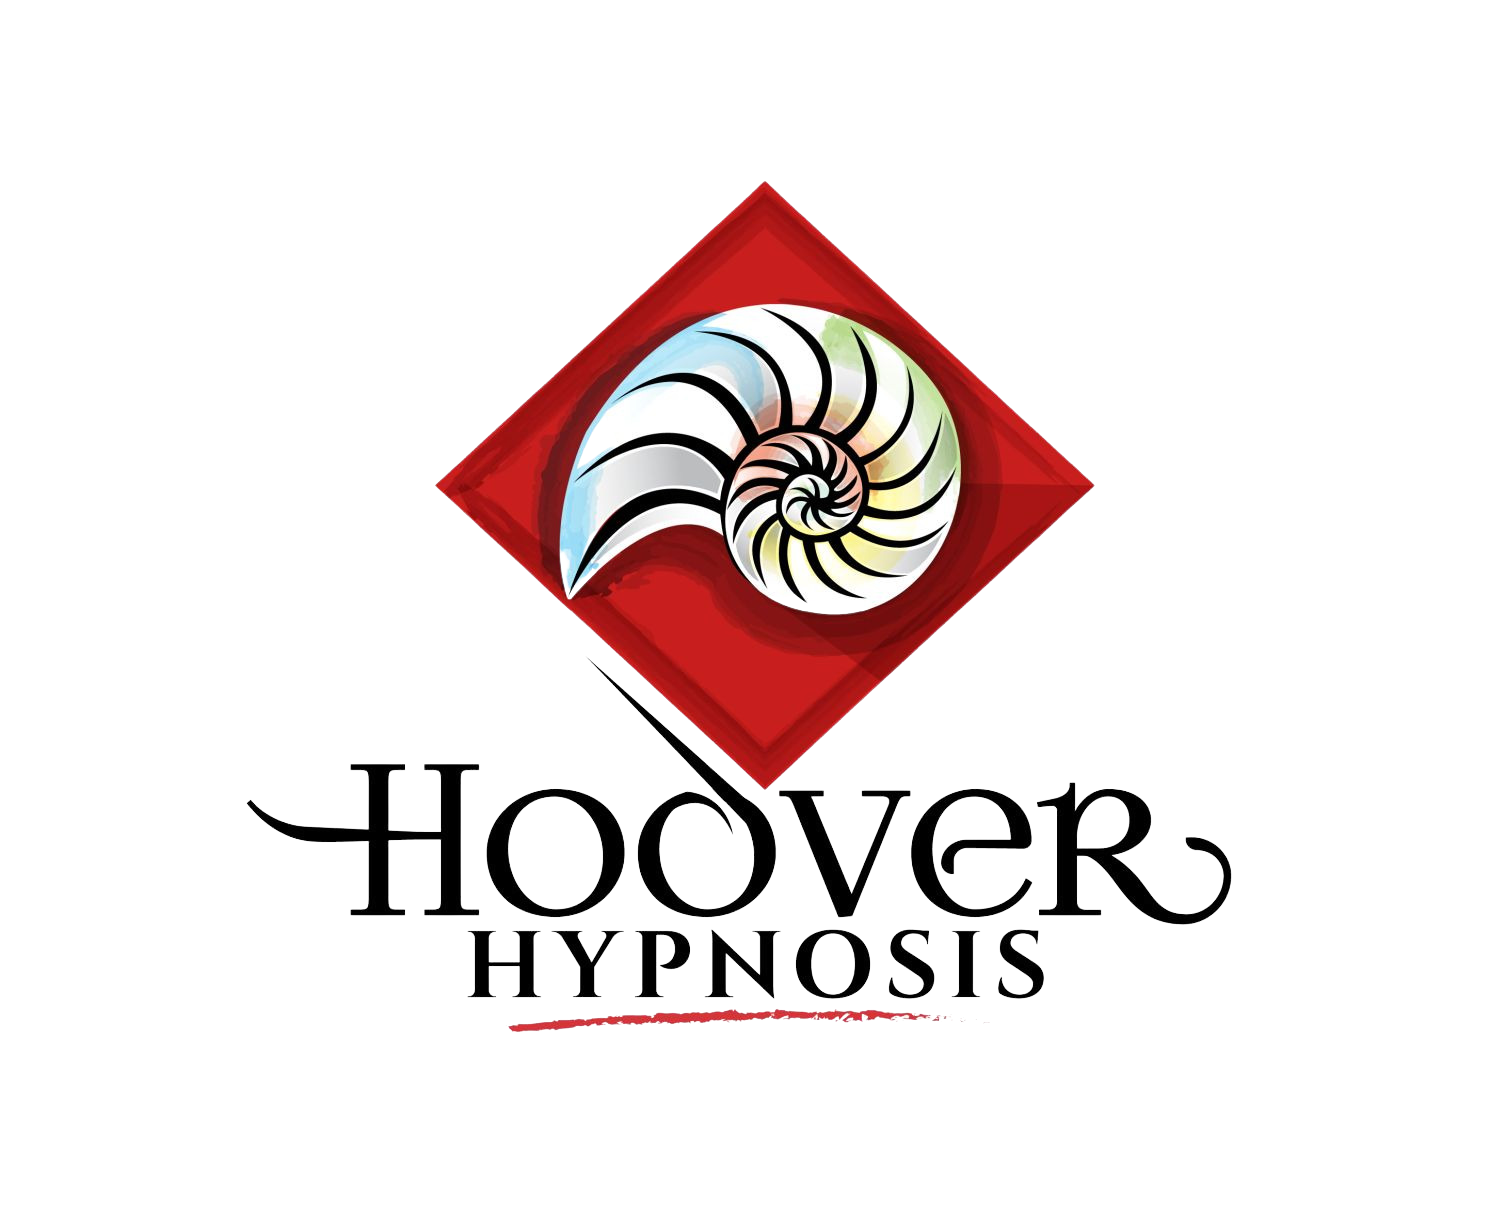 Logo for Hoover Hypnosis serving the greater Birmingham, Alabama area